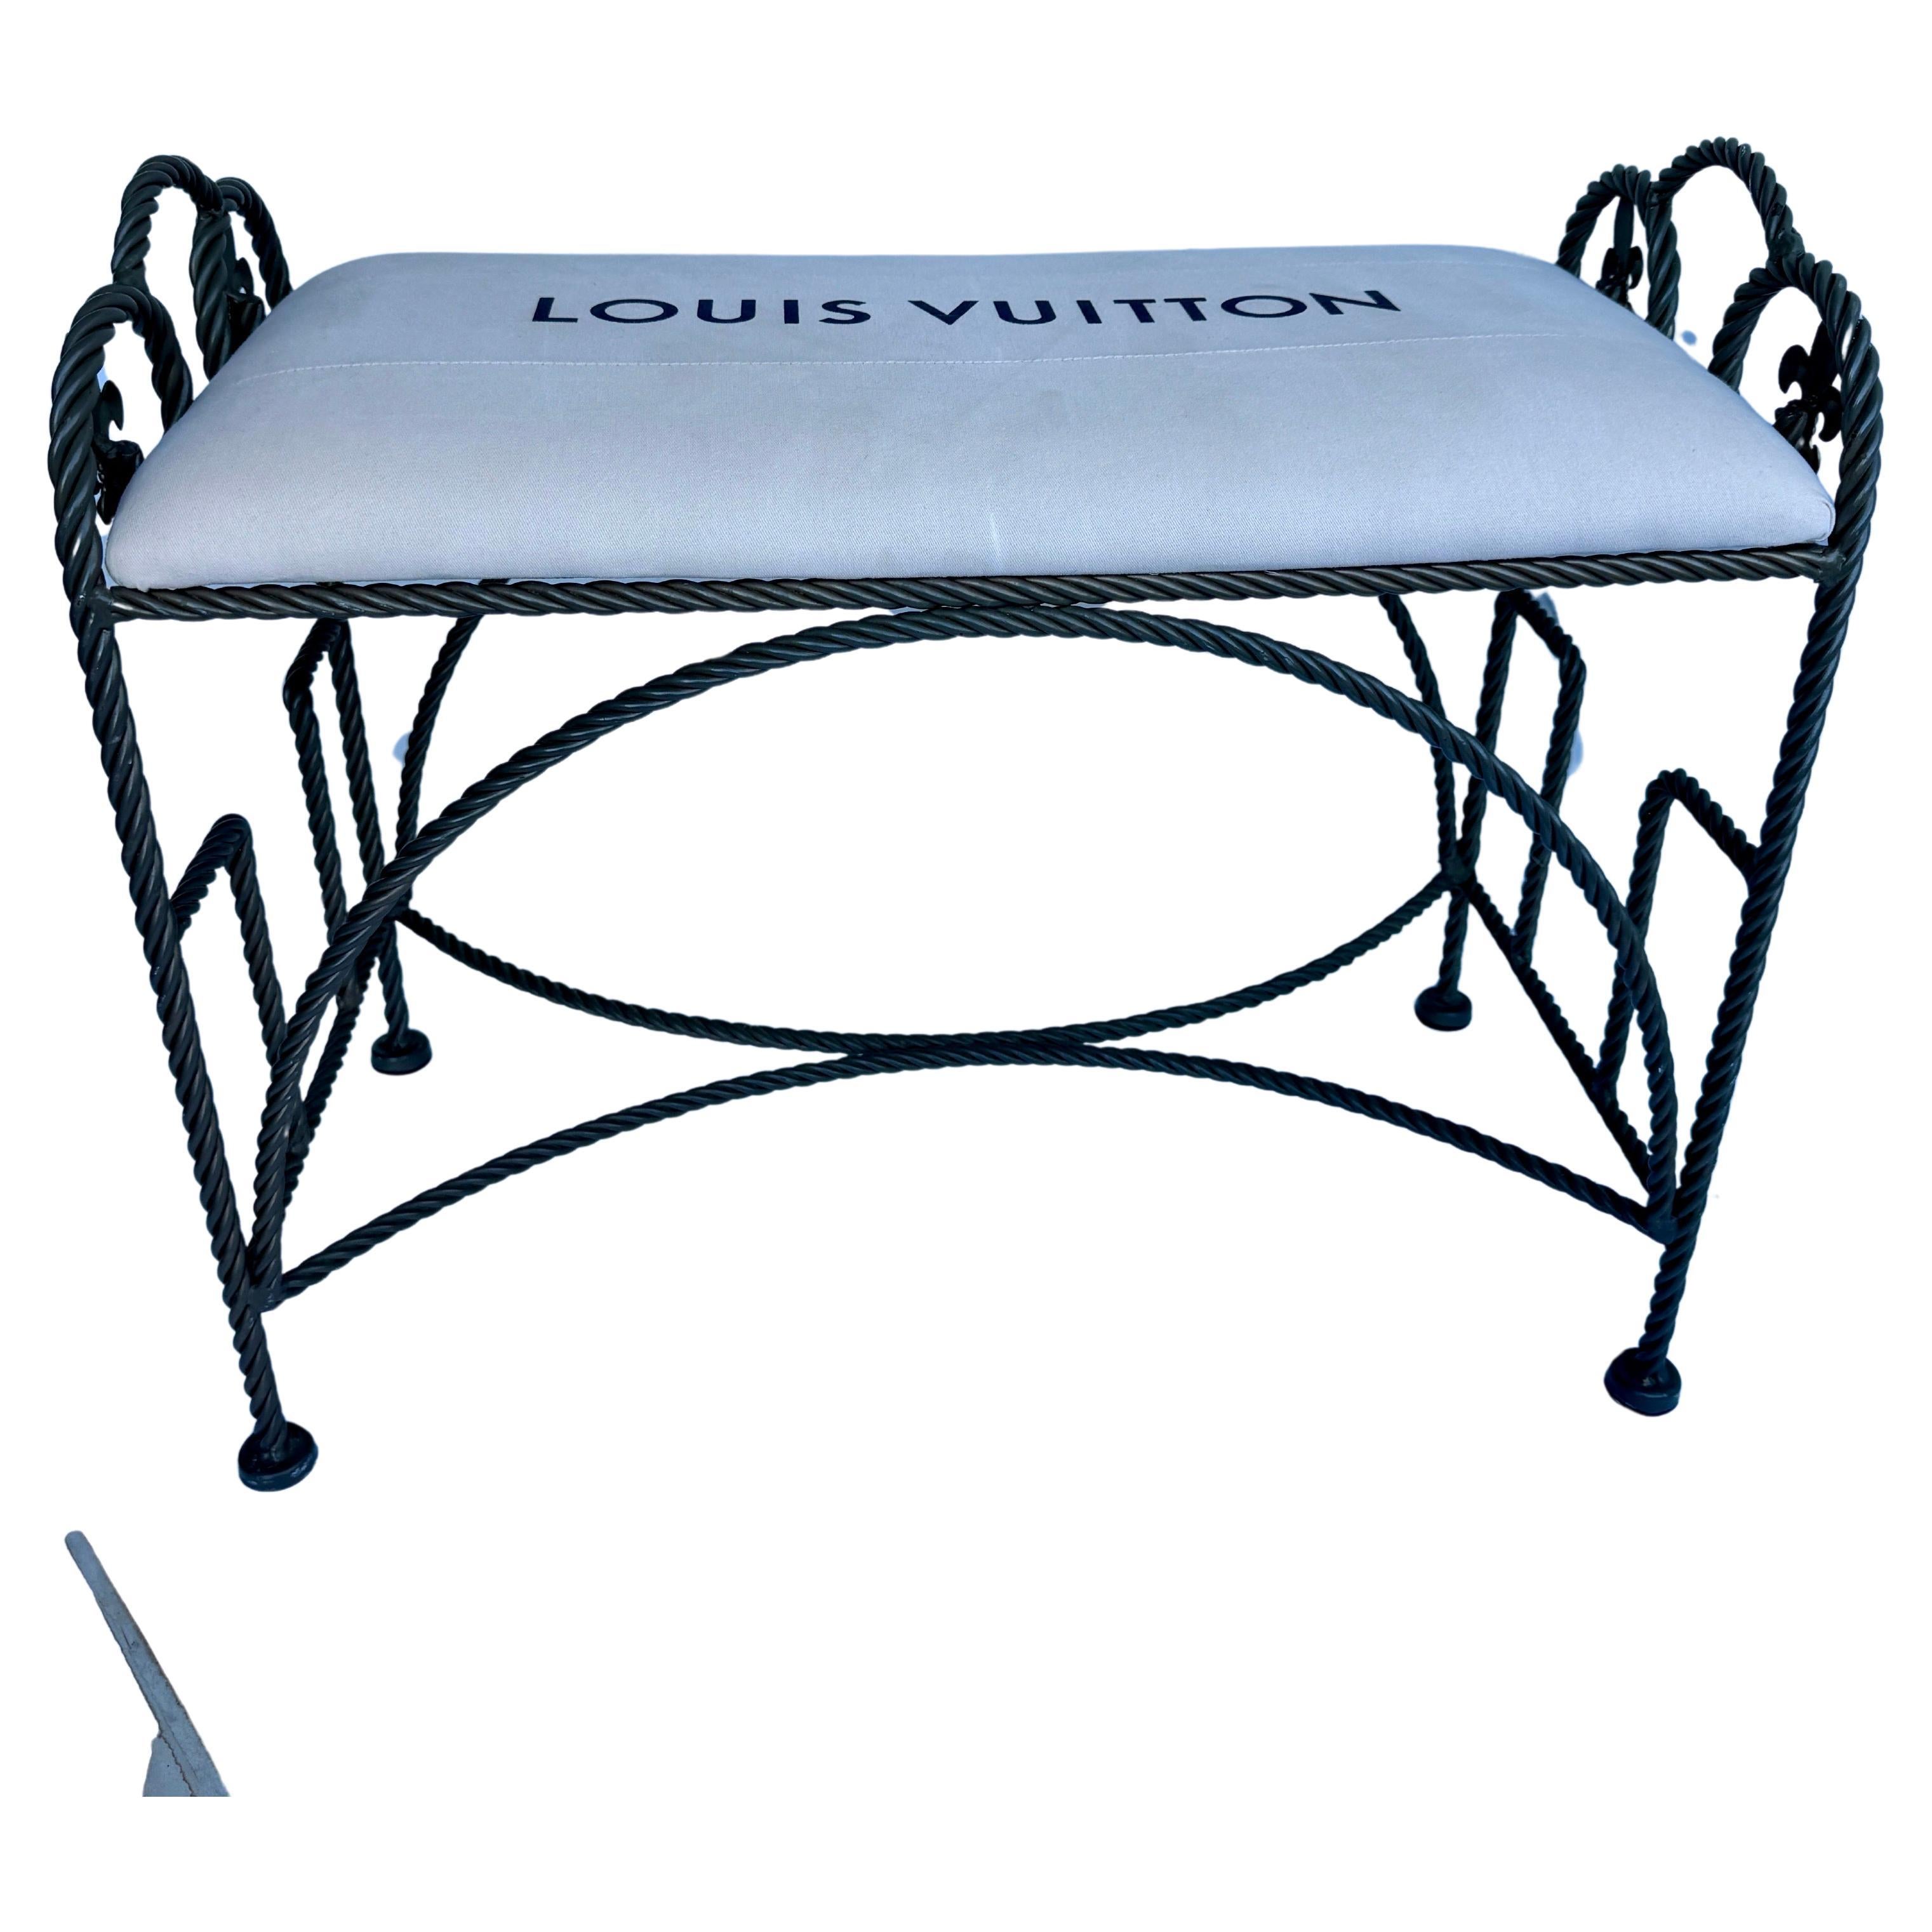 Hand-Crafted French Vintage Roped Iron Bench With Louis Vuitton Bag Fabric